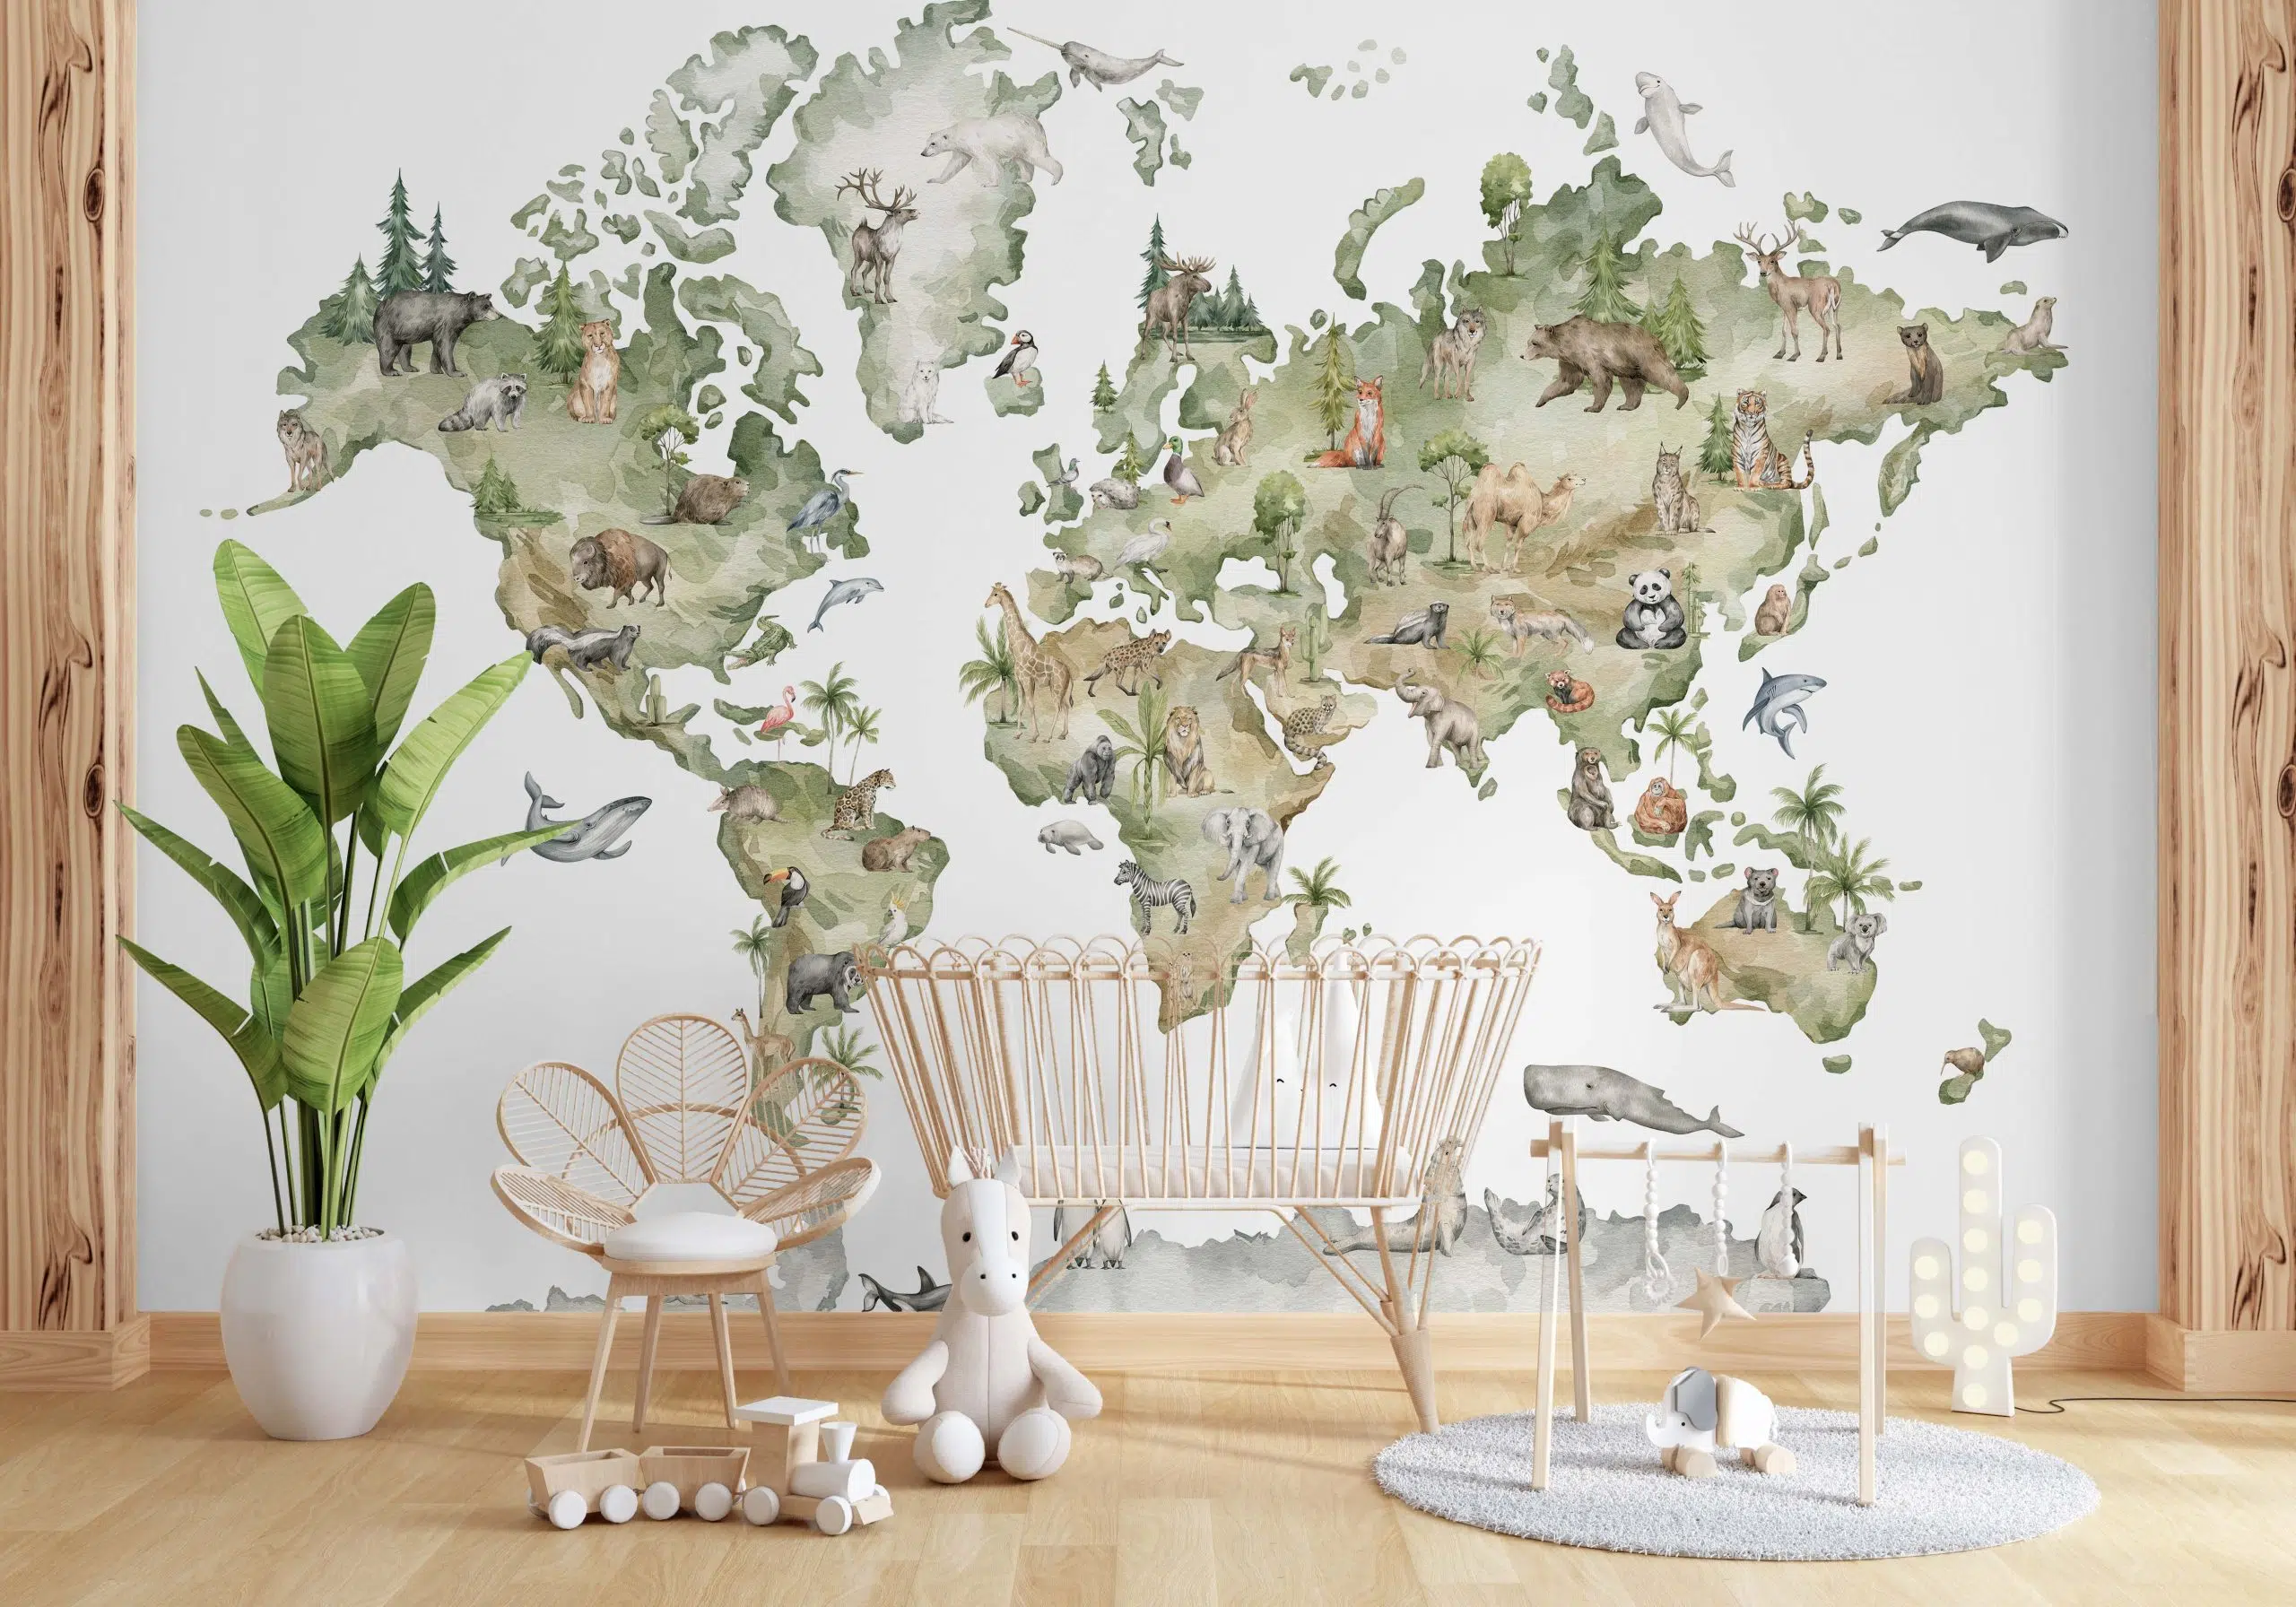 Watercolor world map with animals and natural elements. Wallpaper and wall murals USA